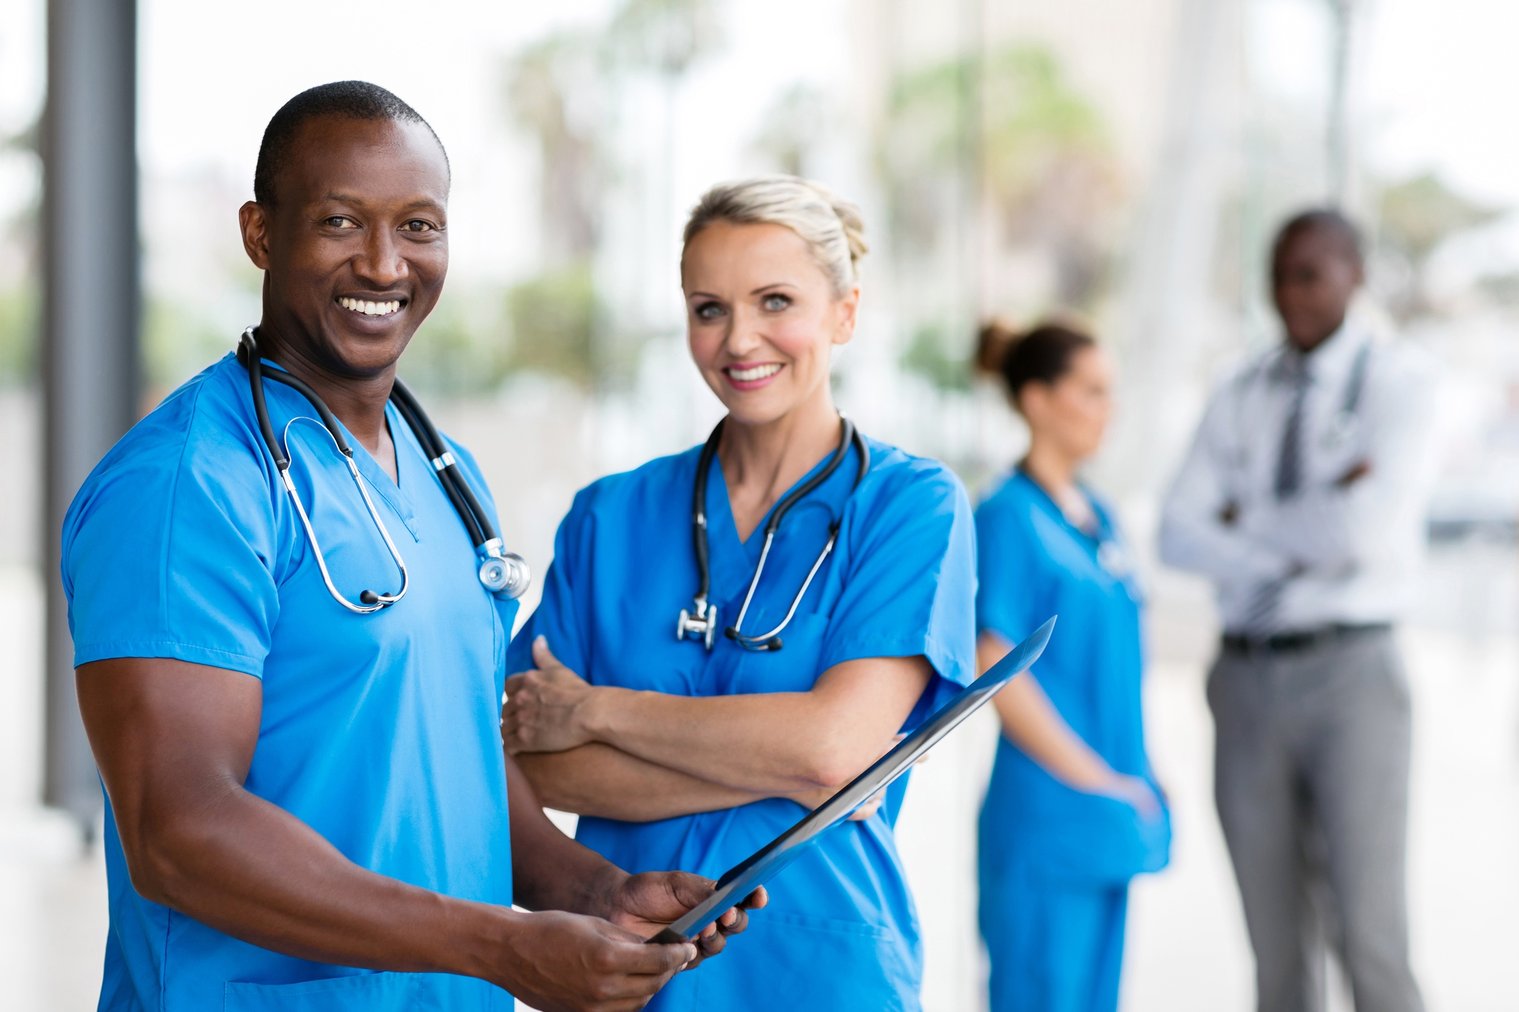 Employee Engagement In Healthcare